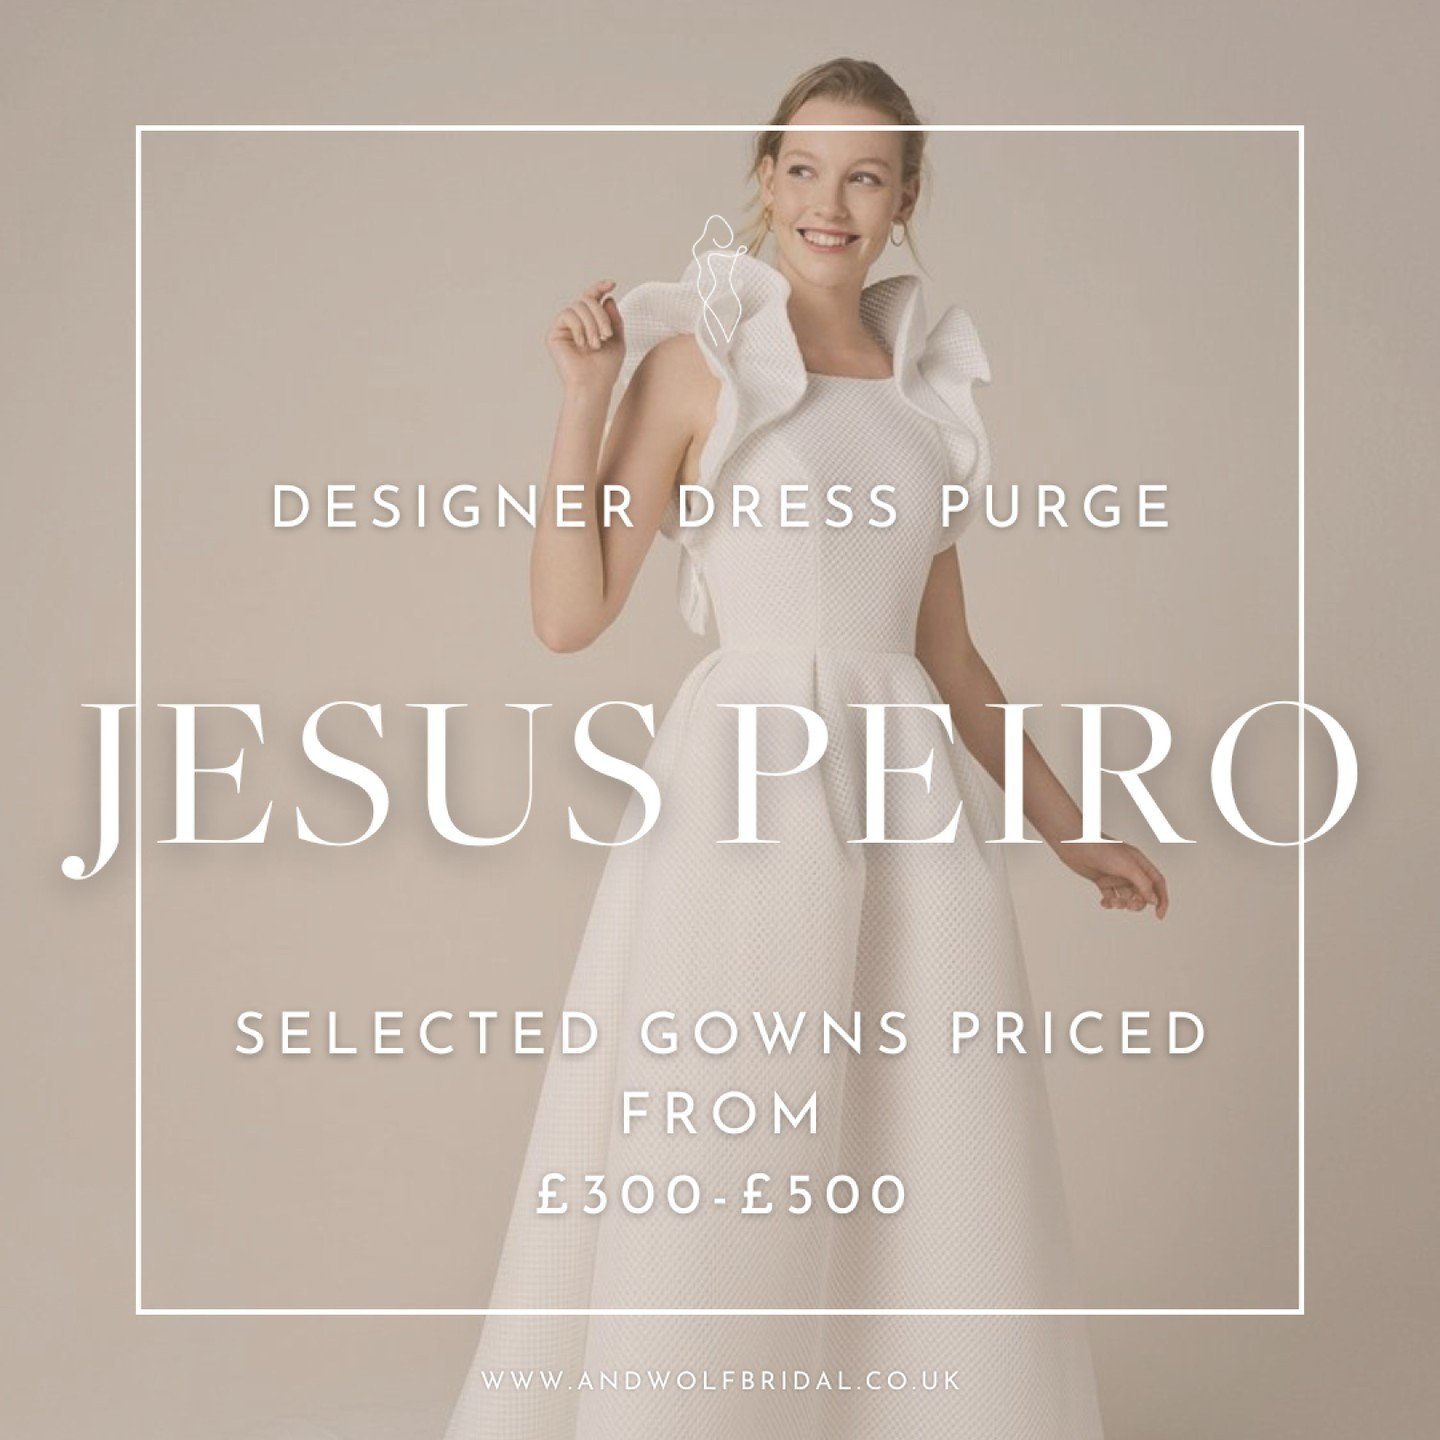 JESUS PEIRO SAMPLE SALE
1st - 31st May 2024

We are off to White Gallery on the 9th May to buy our new dresses for 2025 crazy I know, but we have to wait the same as you lovely lot for our samples.

Anyway, we have identified lots of dresses that we 